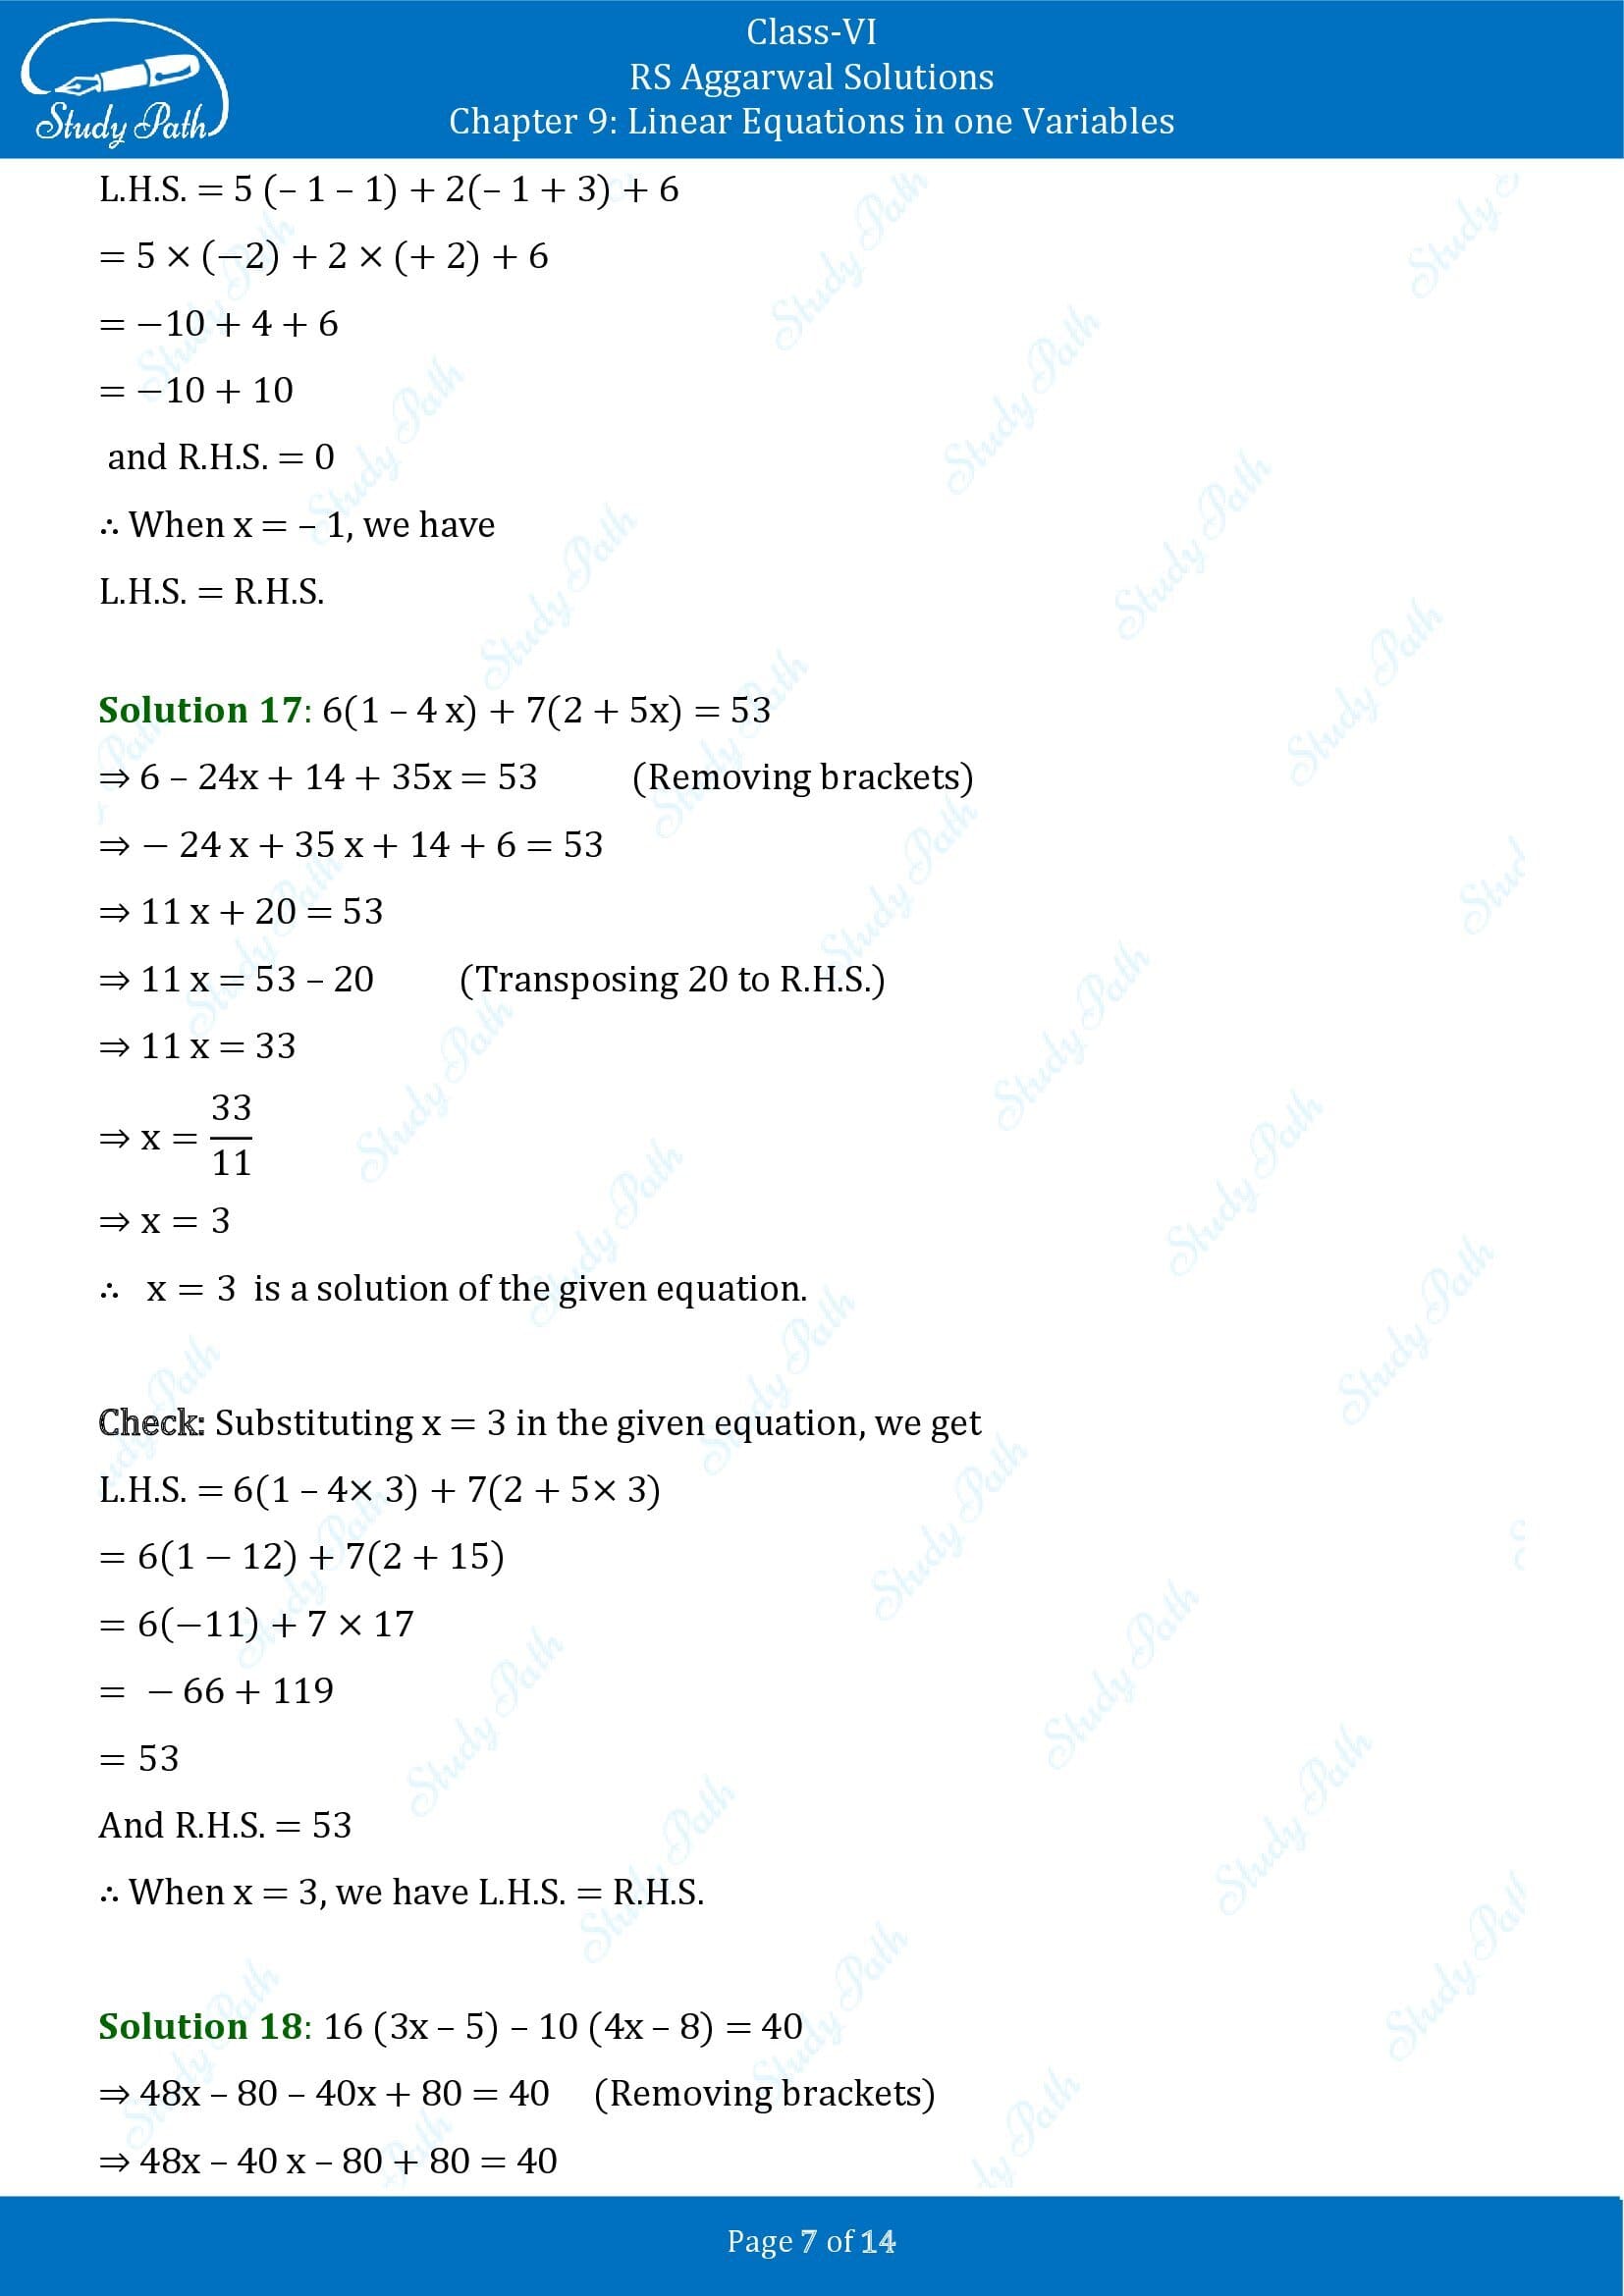 RS Aggarwal Solutions Class 6 Chapter 9 Linear Equations in One Variable Exercise 9B 00007